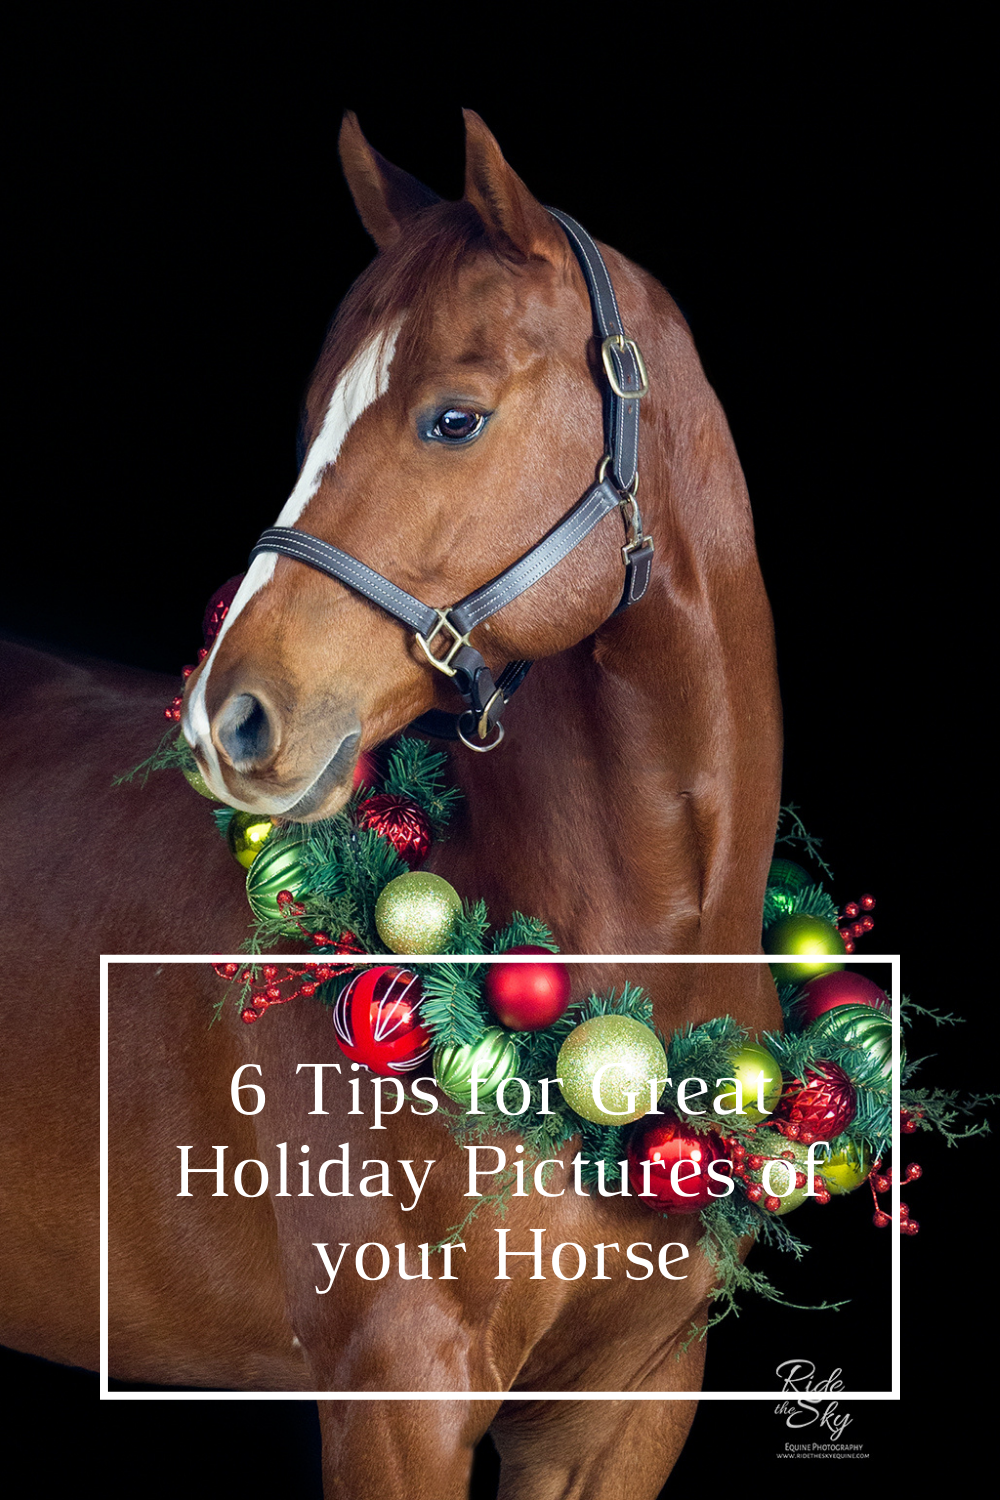 6 Tips for Great Holiday Pictures of Your Horse